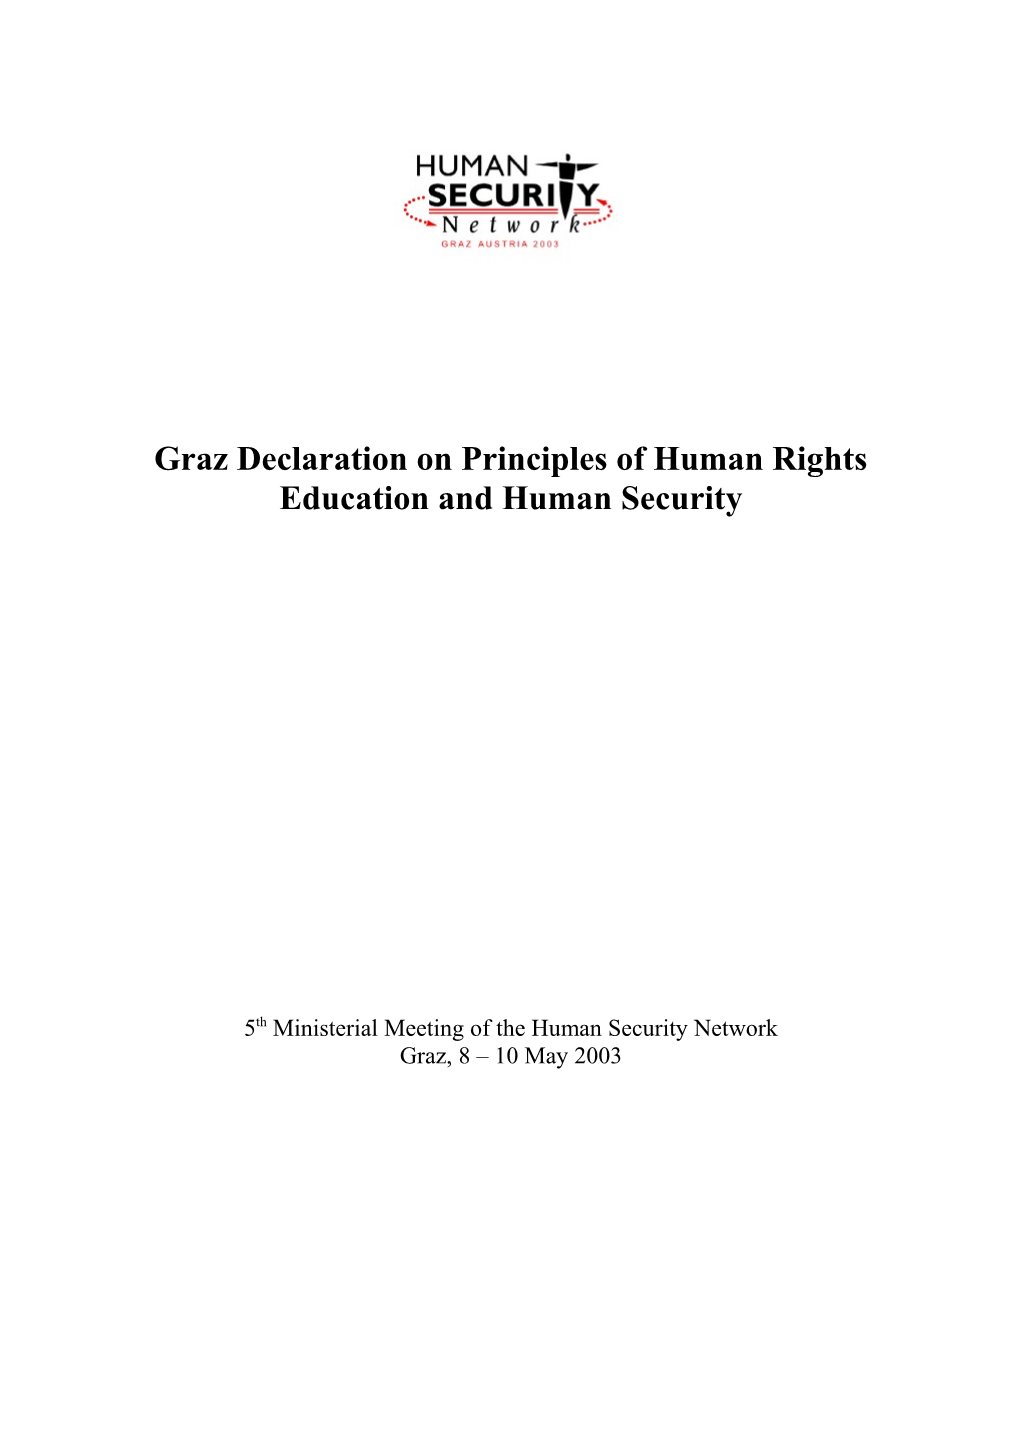 Graz Declaration on Principles of Human Rights Education (HRE)